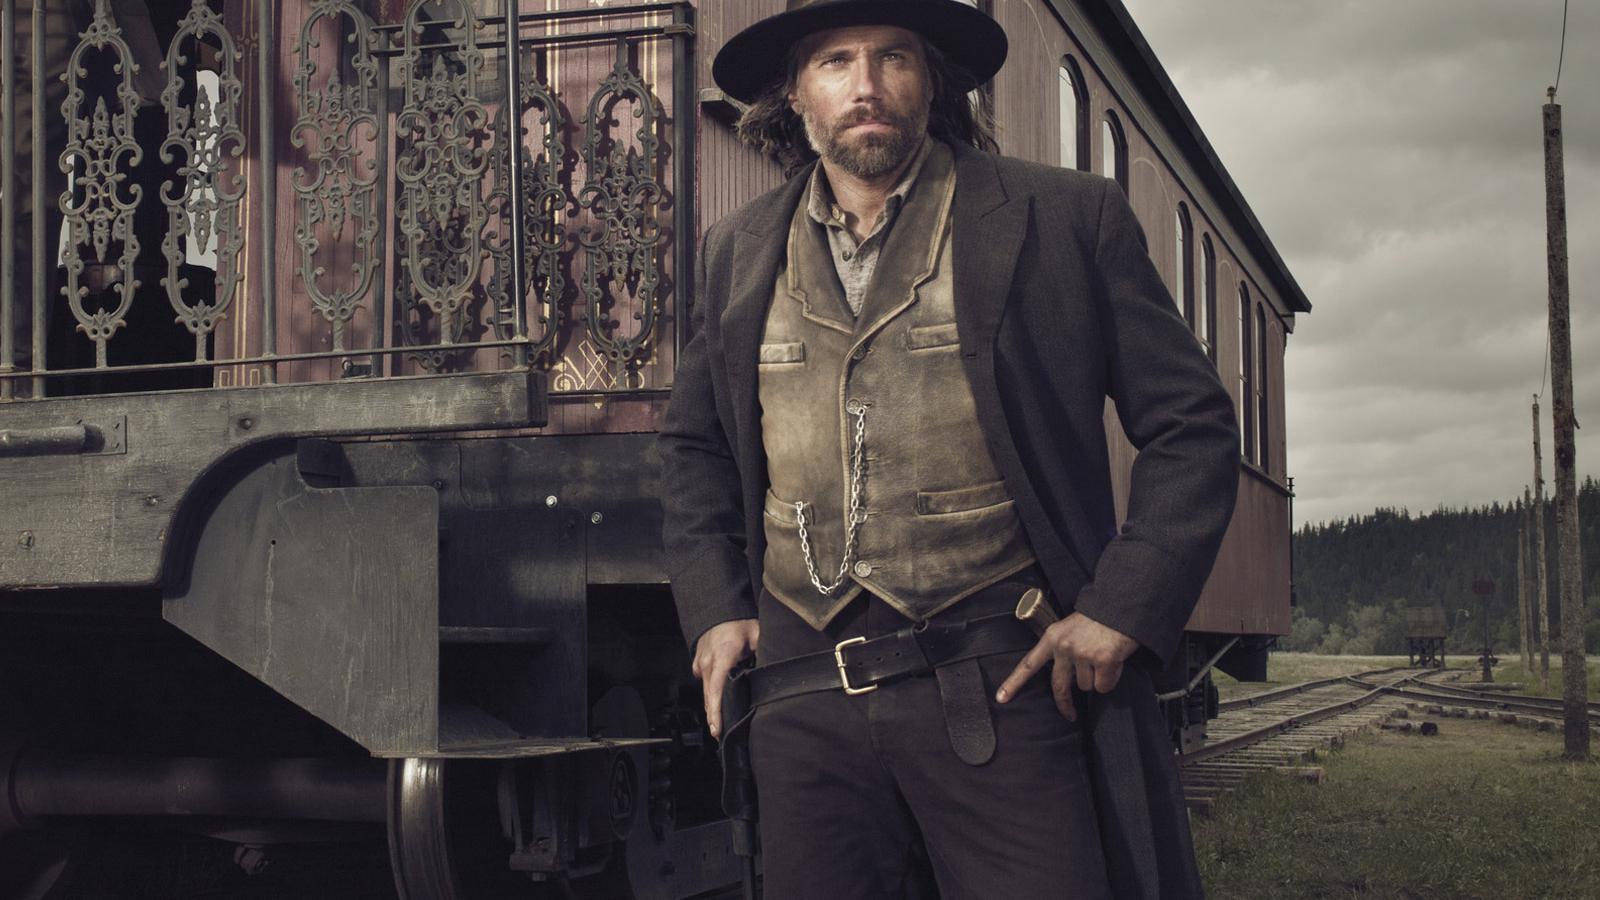 Hell On Wheels Wallpapers